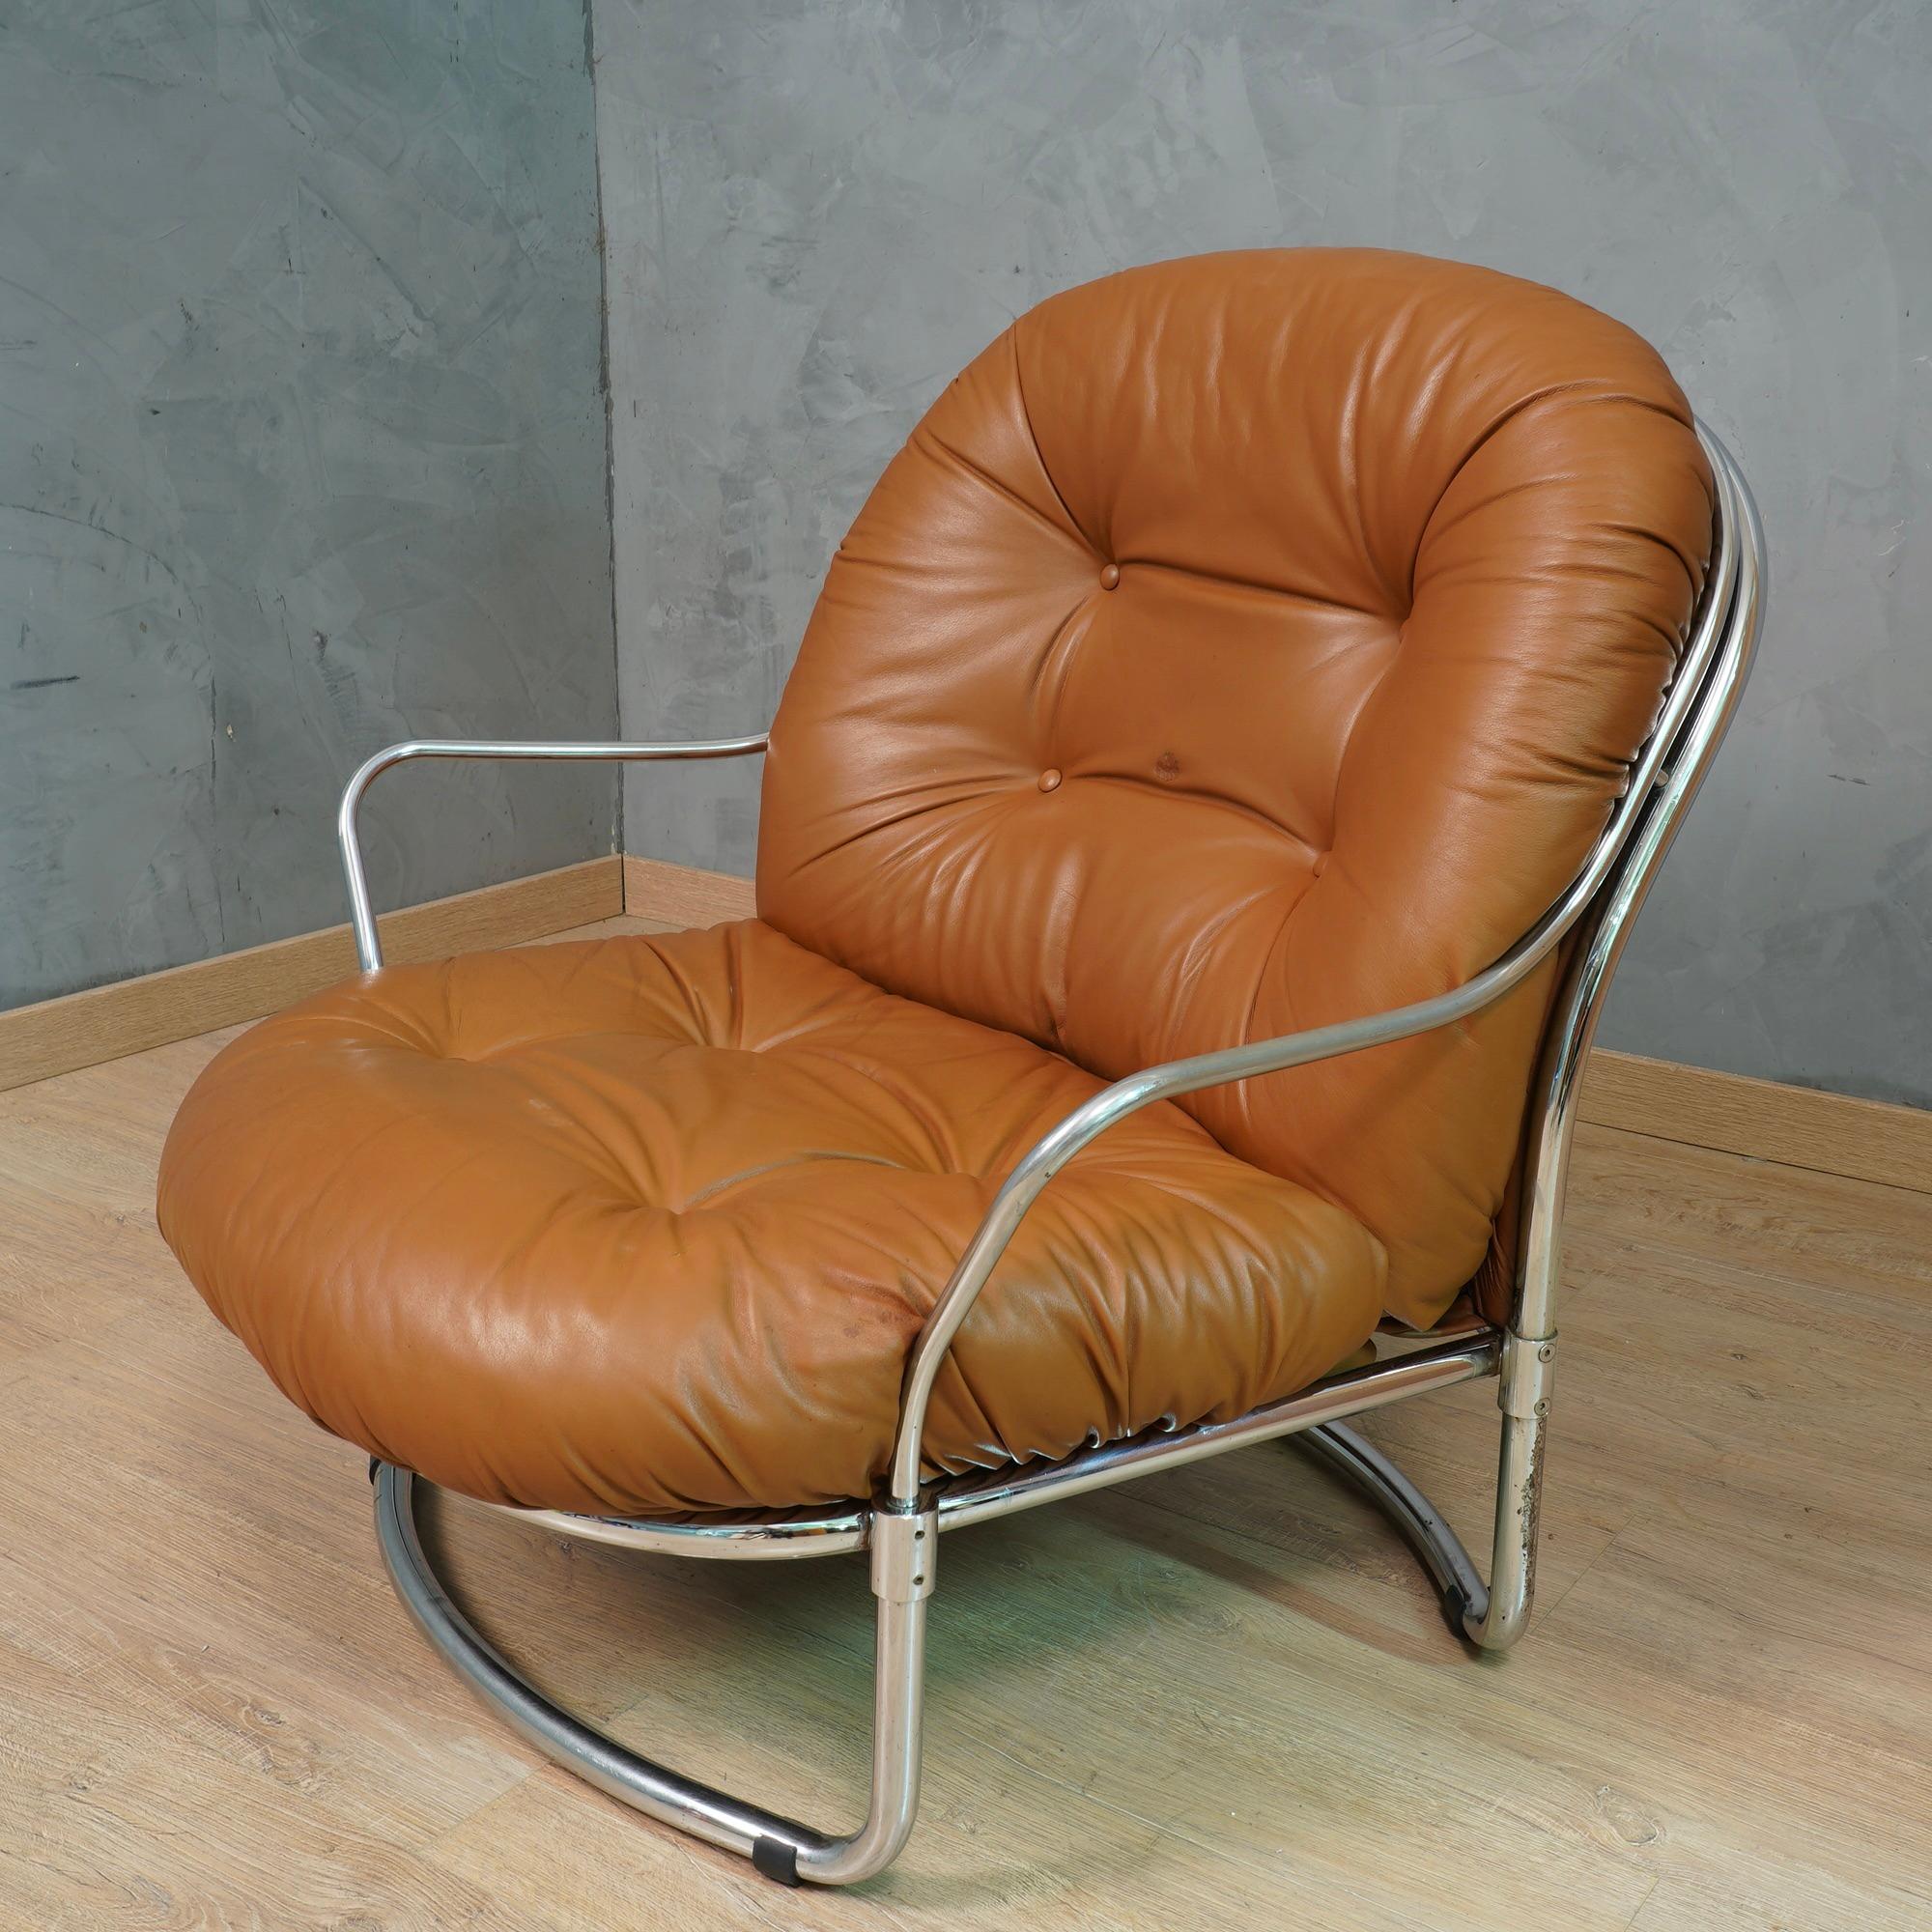 Carlo De Carli for Cinova Mod. 915 Chrome and Brown Leather Arm Chair, 1969 In Good Condition For Sale In Rome, IT